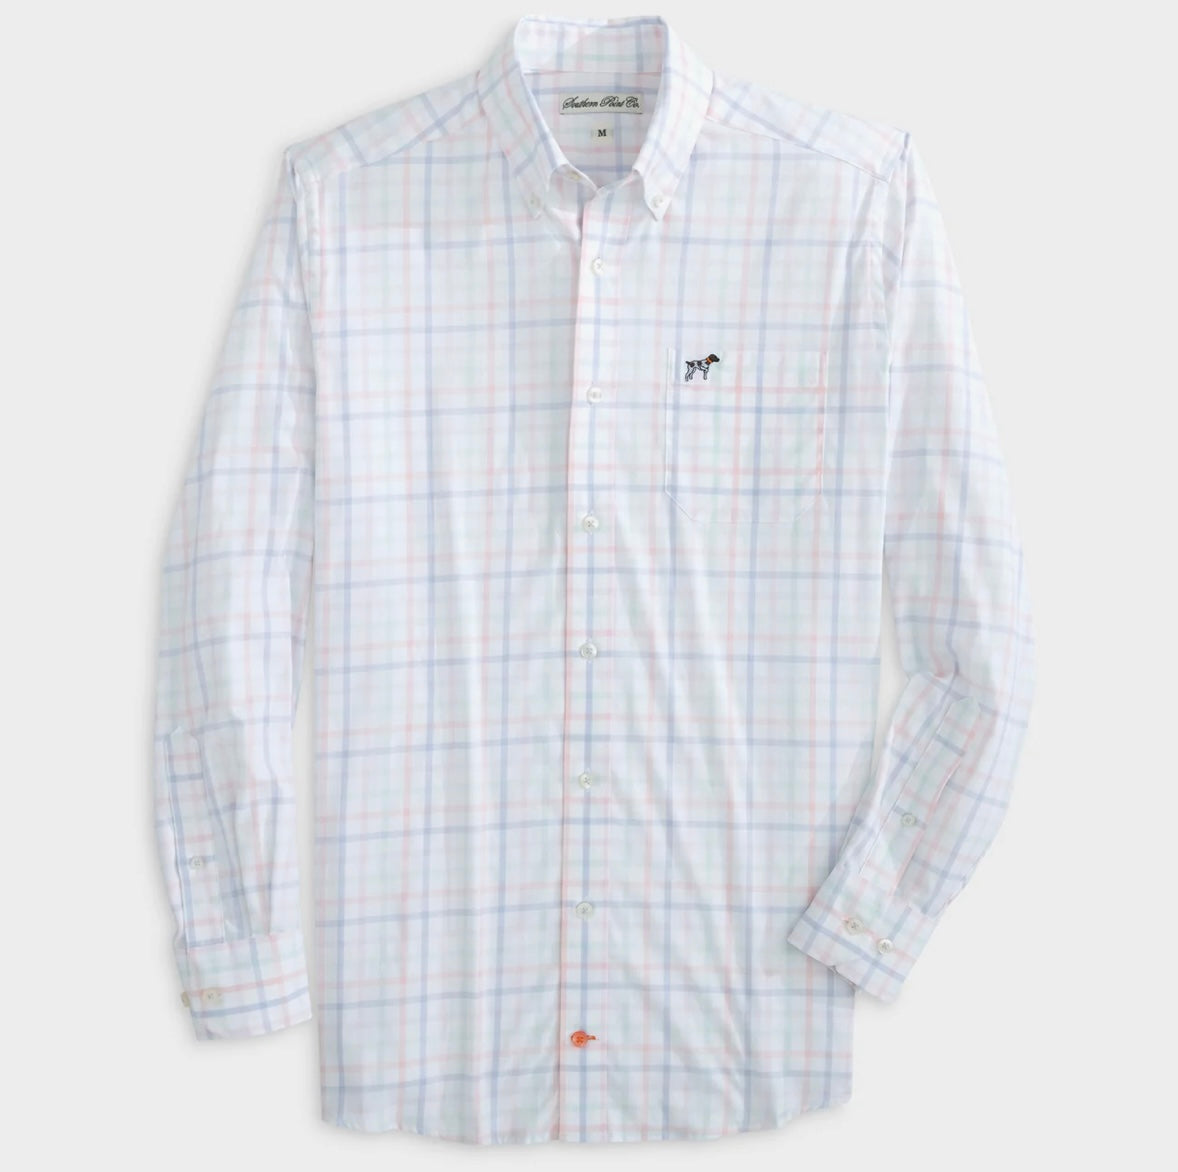 Hadley Performance YOUTH Button Down in Shoreline Plaid by Southern Point Co.